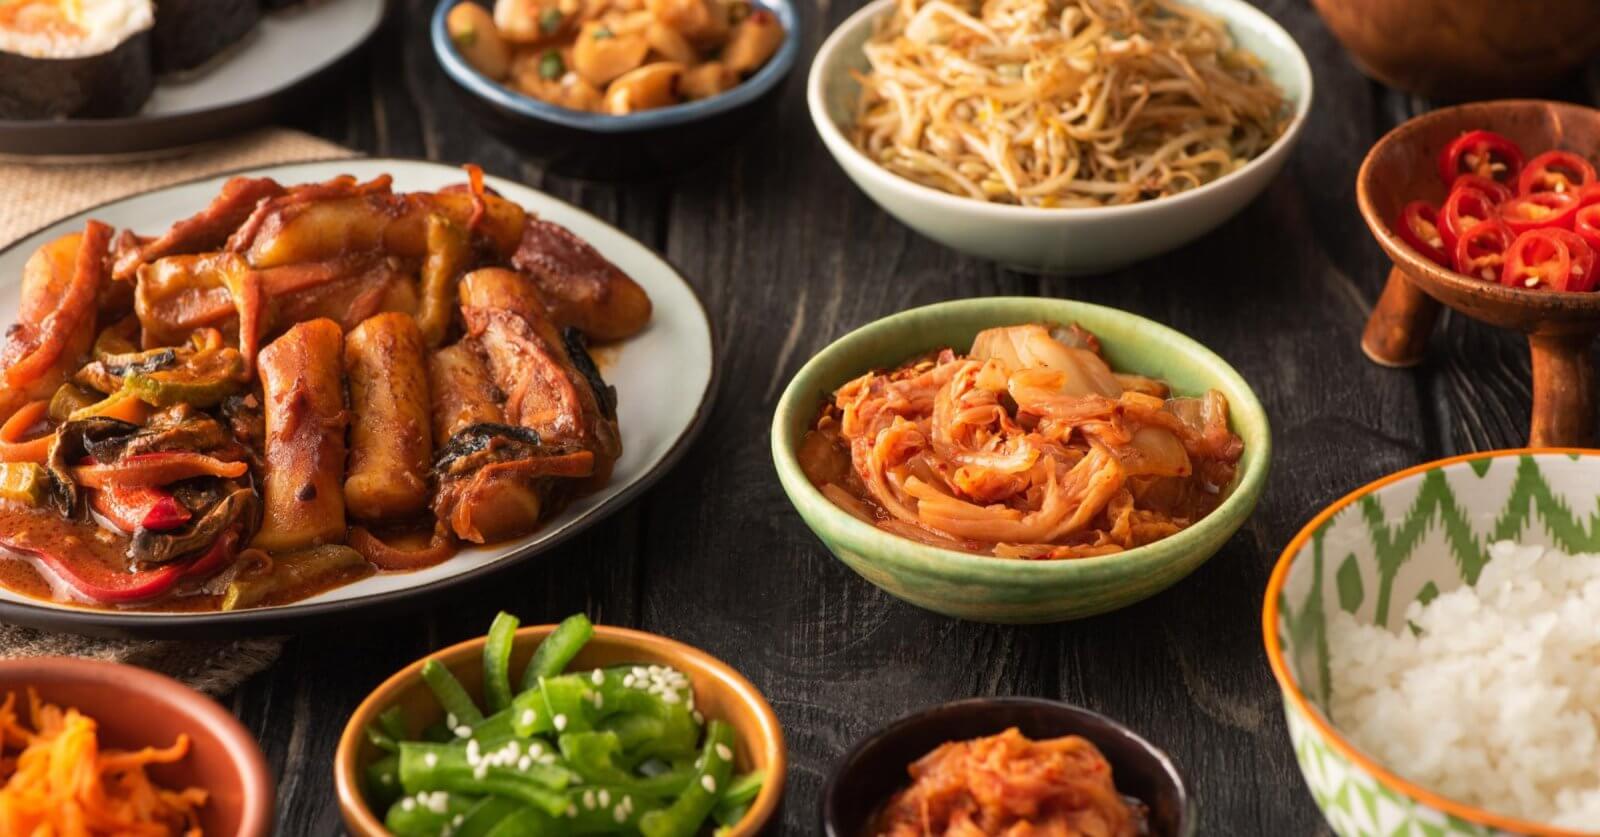 A variety of Korean dishes are displayed on a dark wooden table. The spread, which showcases the best of Korean cuisine, includes a plate of stir-fried meat and vegetables, a bowl of sauteed bean sprouts, kimchi from one of Metro Manila’s top Korean groceries, sliced red chili peppers, green beans with sesame seeds, white rice, and small dishes of other sides.